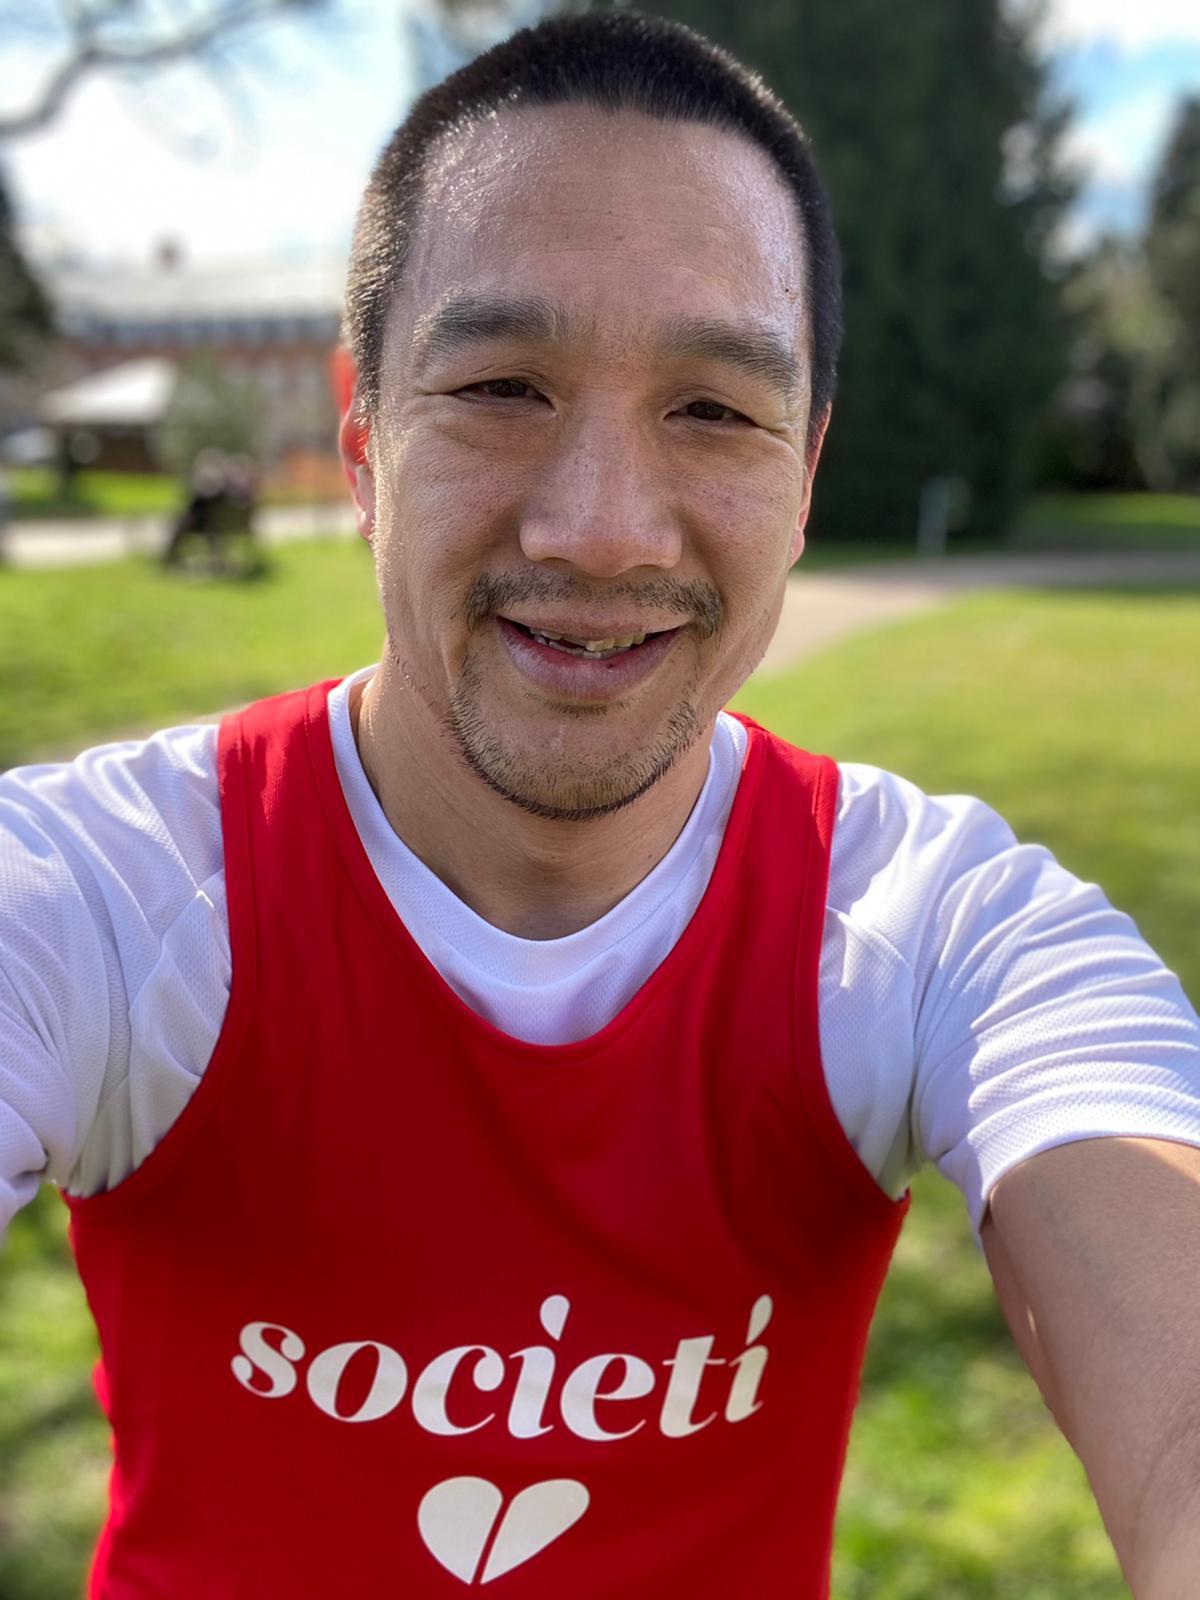 Dave Oh will be taking part in the virtual London Marathon